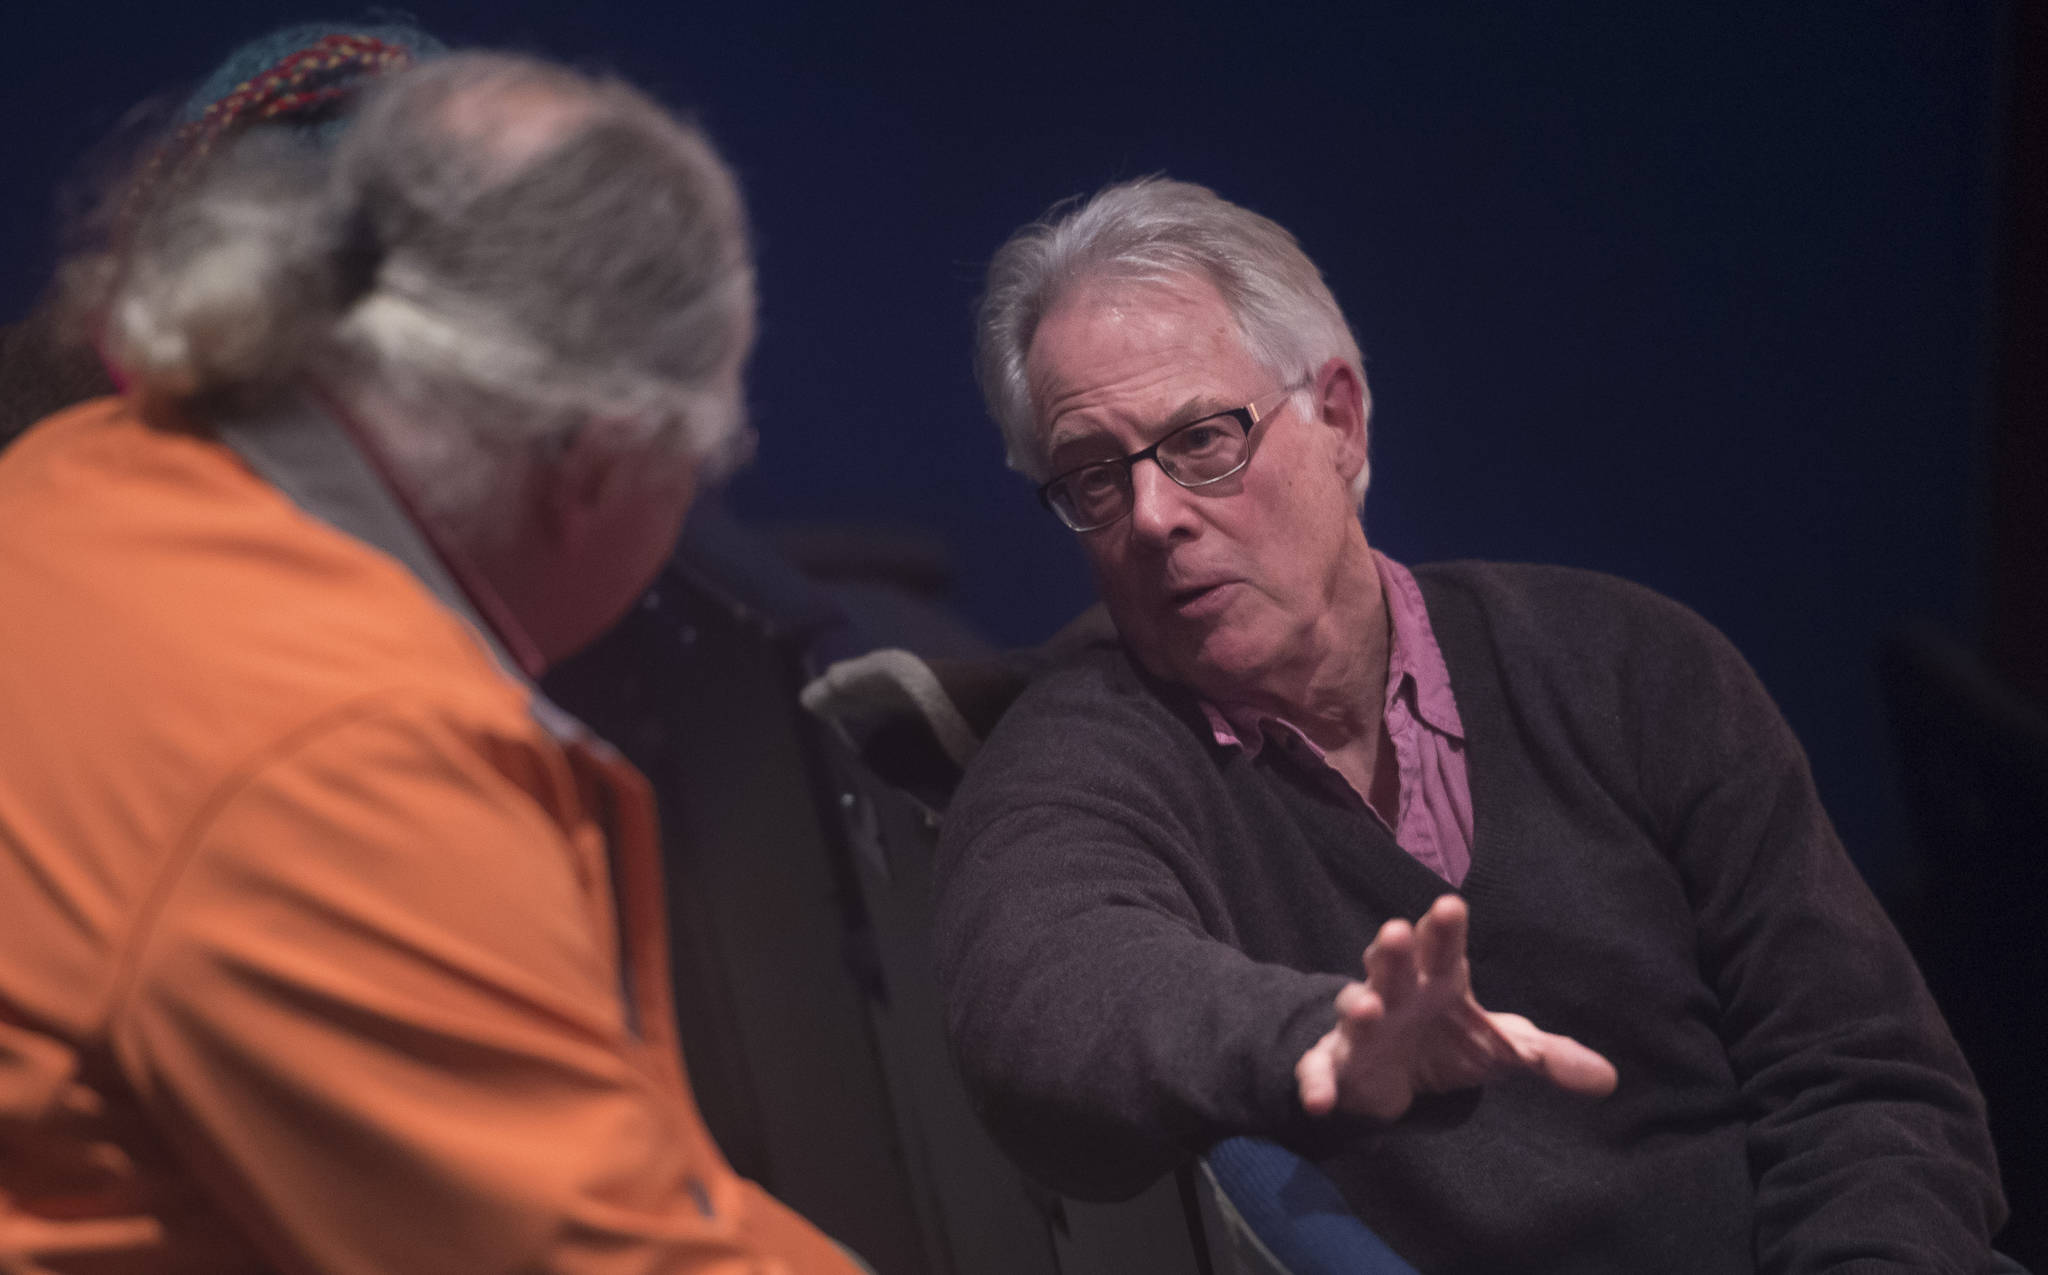 Joel Bennett talks about his play “Dreaming Glacier Bay” before the first viewing in front of an audience at Perseverance Theatre on Tuesday, Oct. 25, 2017. (Michael Penn | Capital City Weekly)